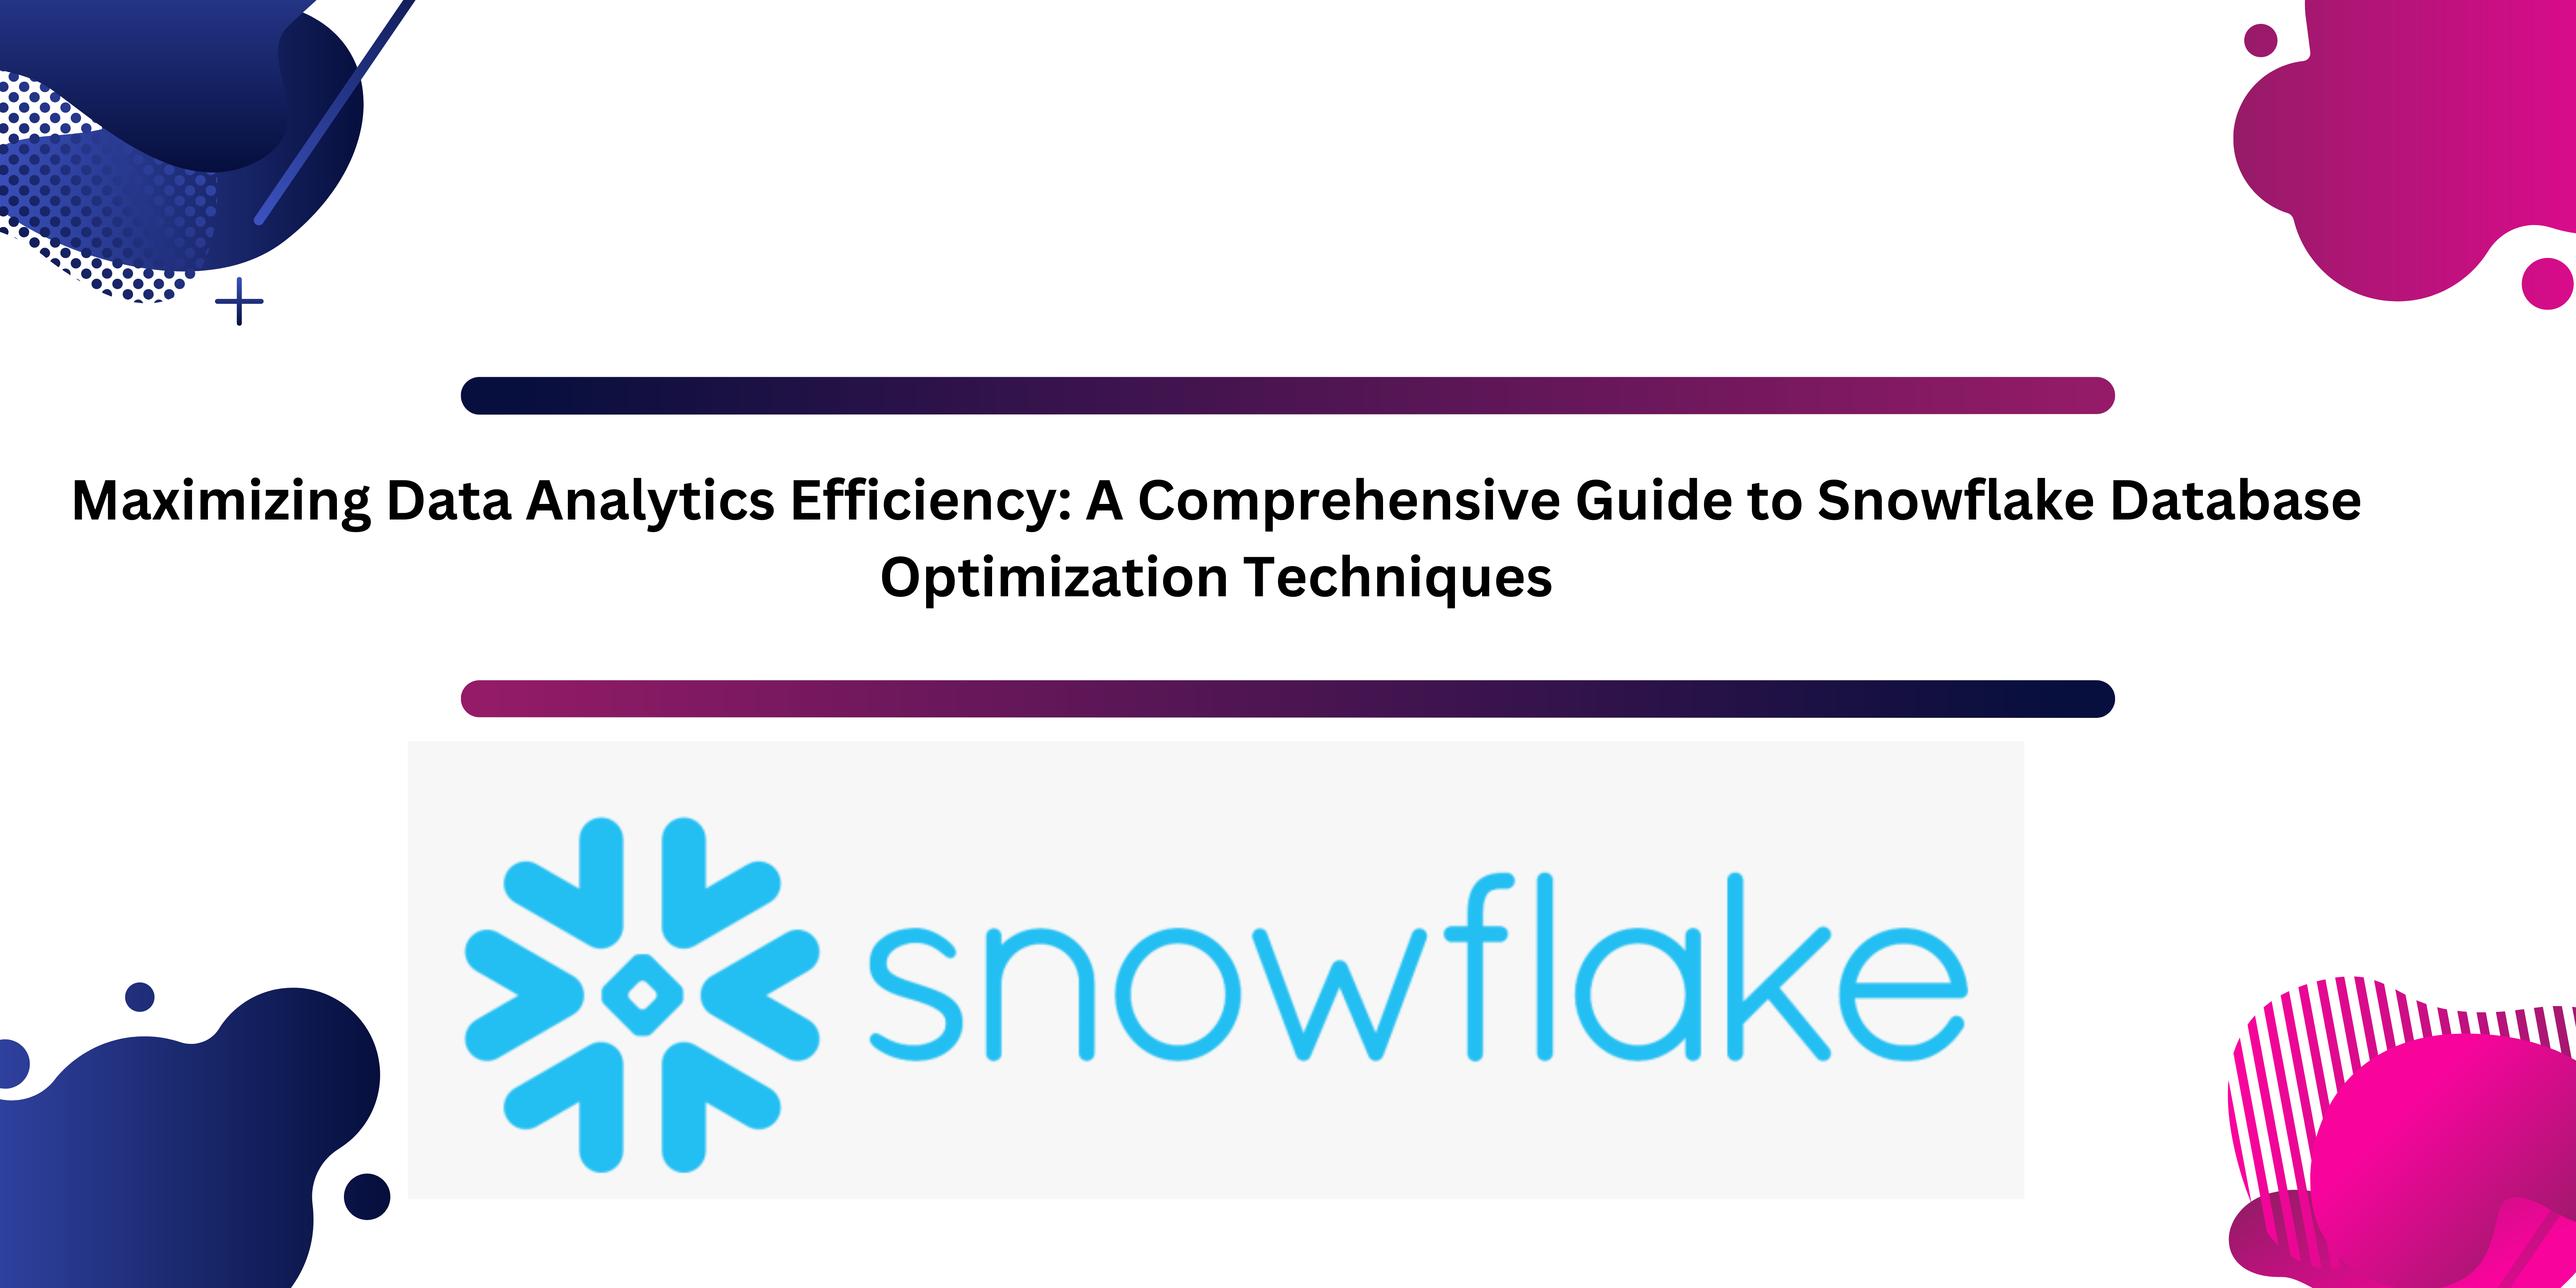 You are currently viewing Maximizing Data Analytics Efficiency: A Comprehensive Guide to Snowflake Database Optimization Techniques